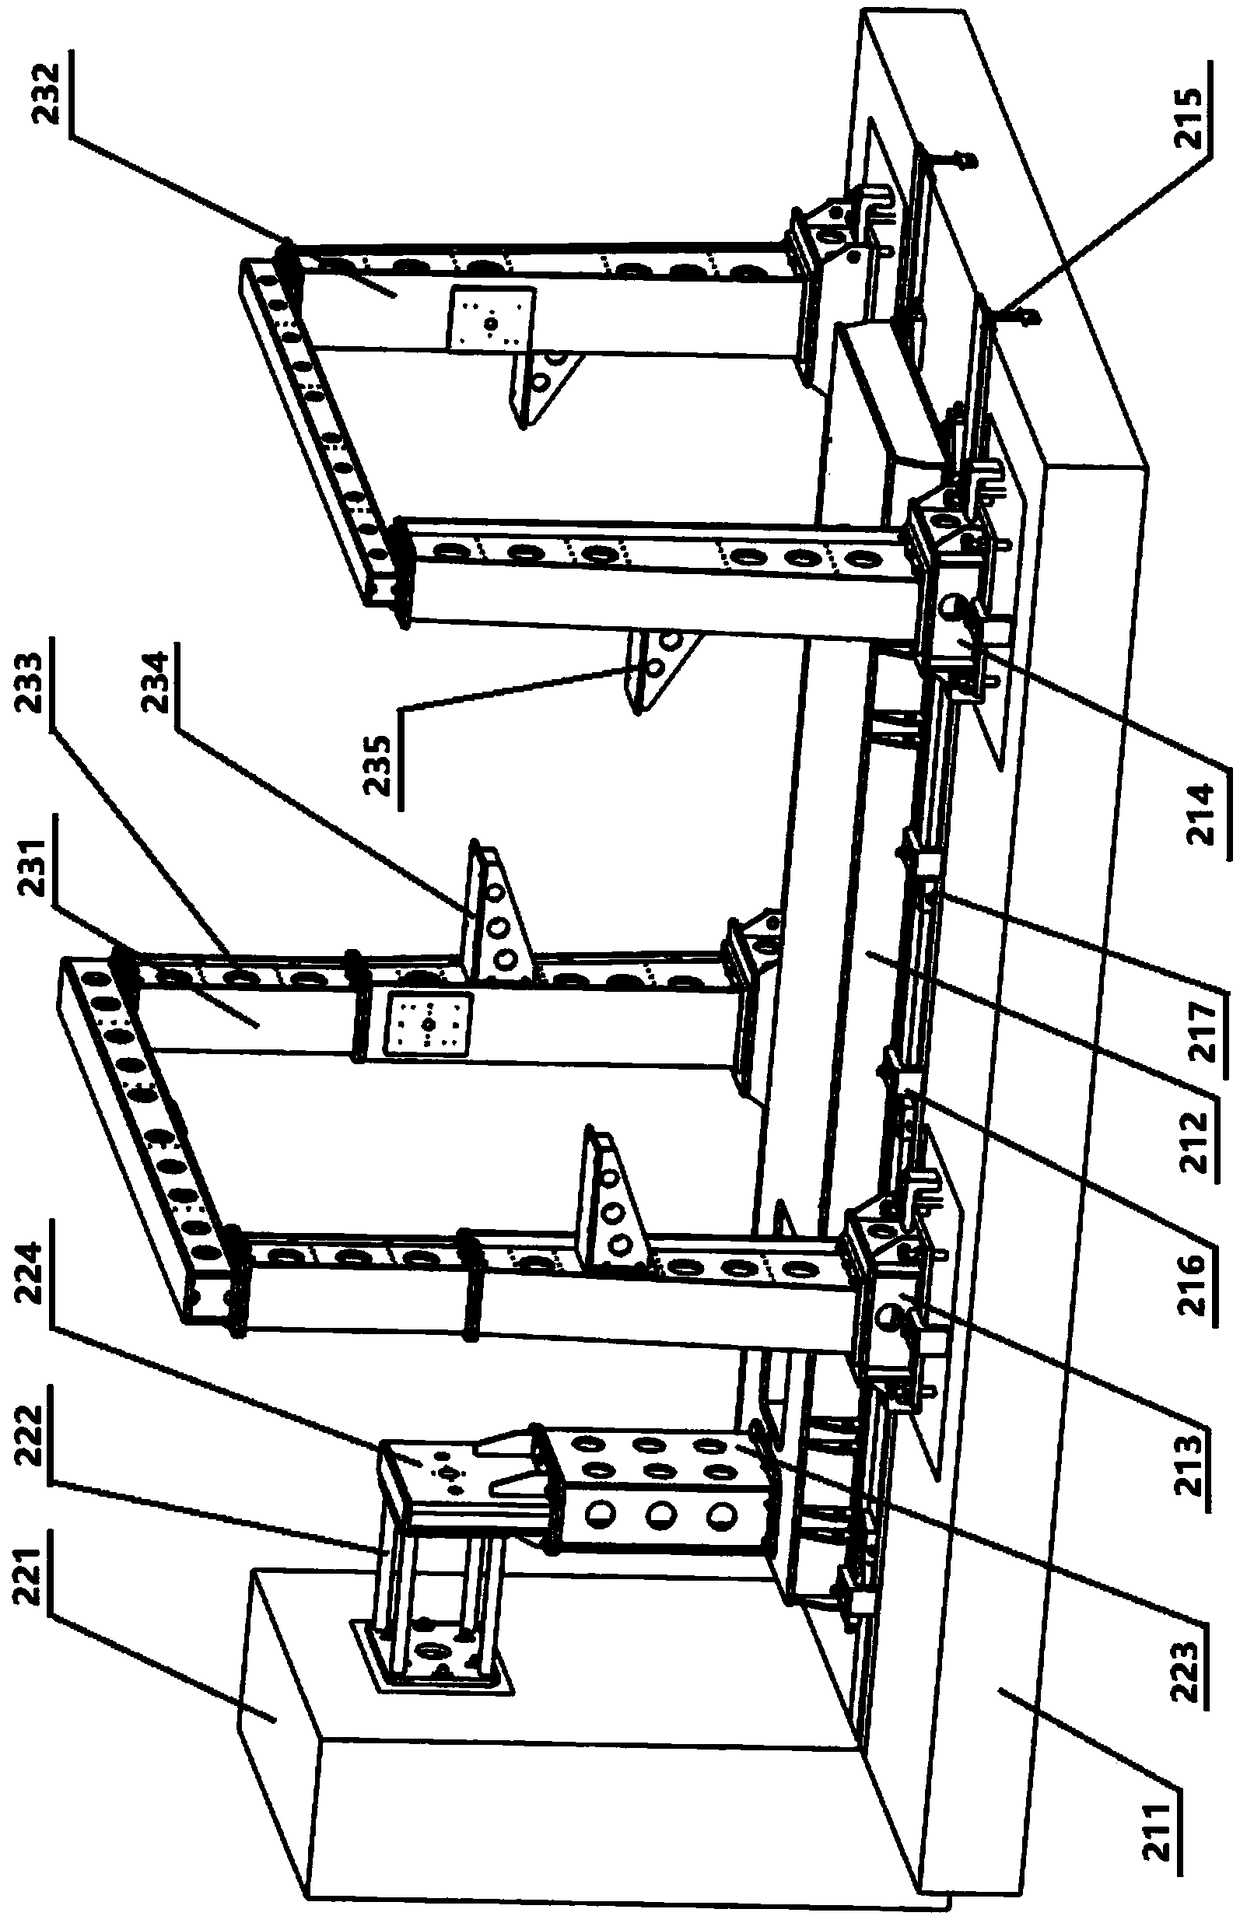 Six-component test stand and method for measuring vector thrust